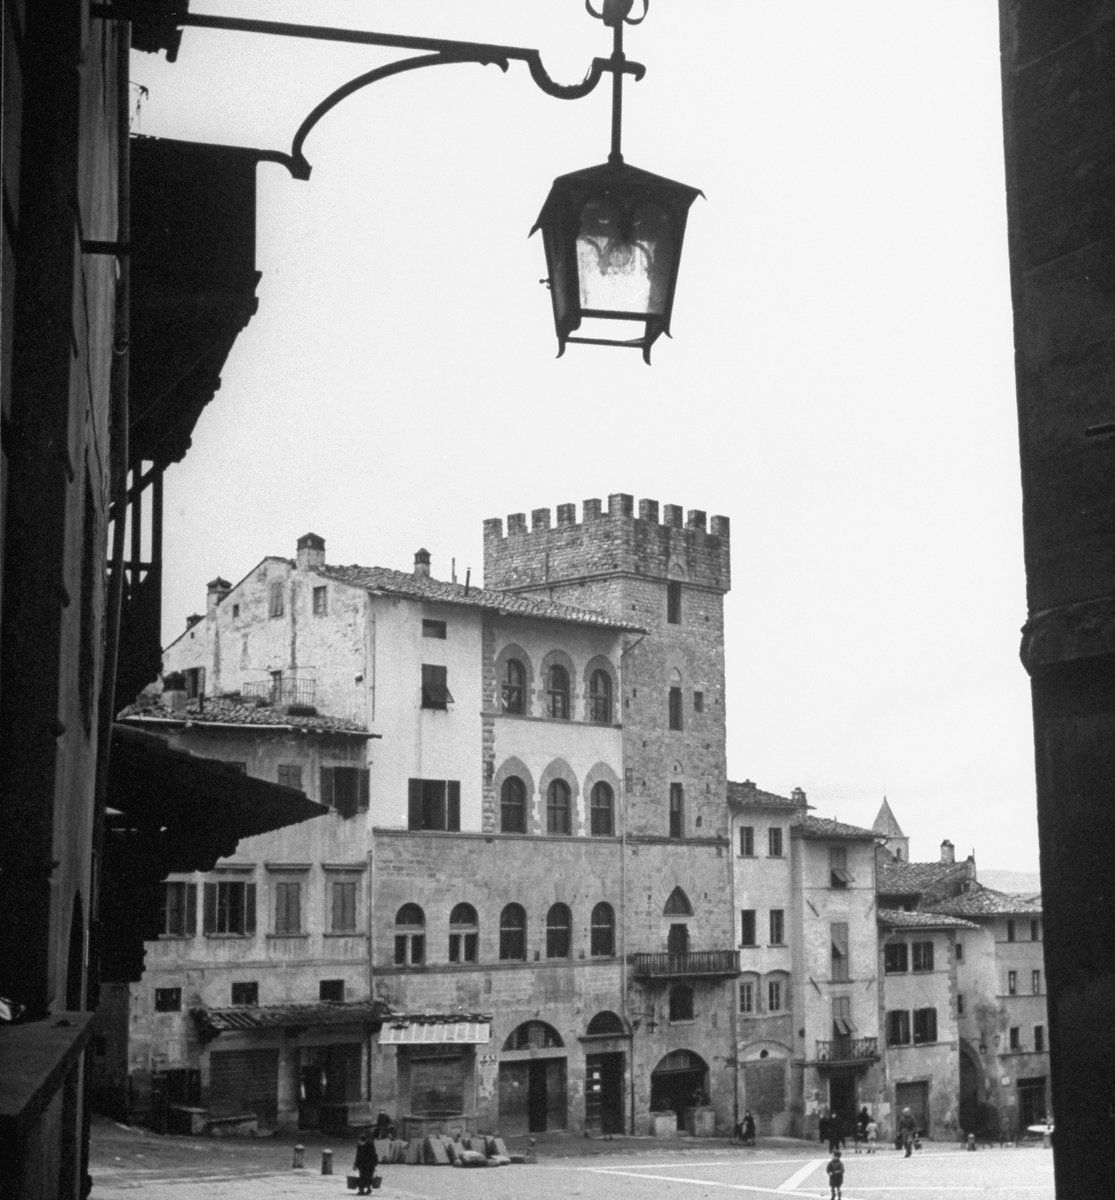 A view of the tranquil Italian city of Arezzo, Tuscany, 1946.

To view more dreamy destinations from the LIFE archive, click the link below. 

life.com/destinations/

(📷 Hans Wild/LIFE Picture Collection) 

#LIFEMagazine #HansWild #Arezzo #Tuscany #Traveltuesday #1940s